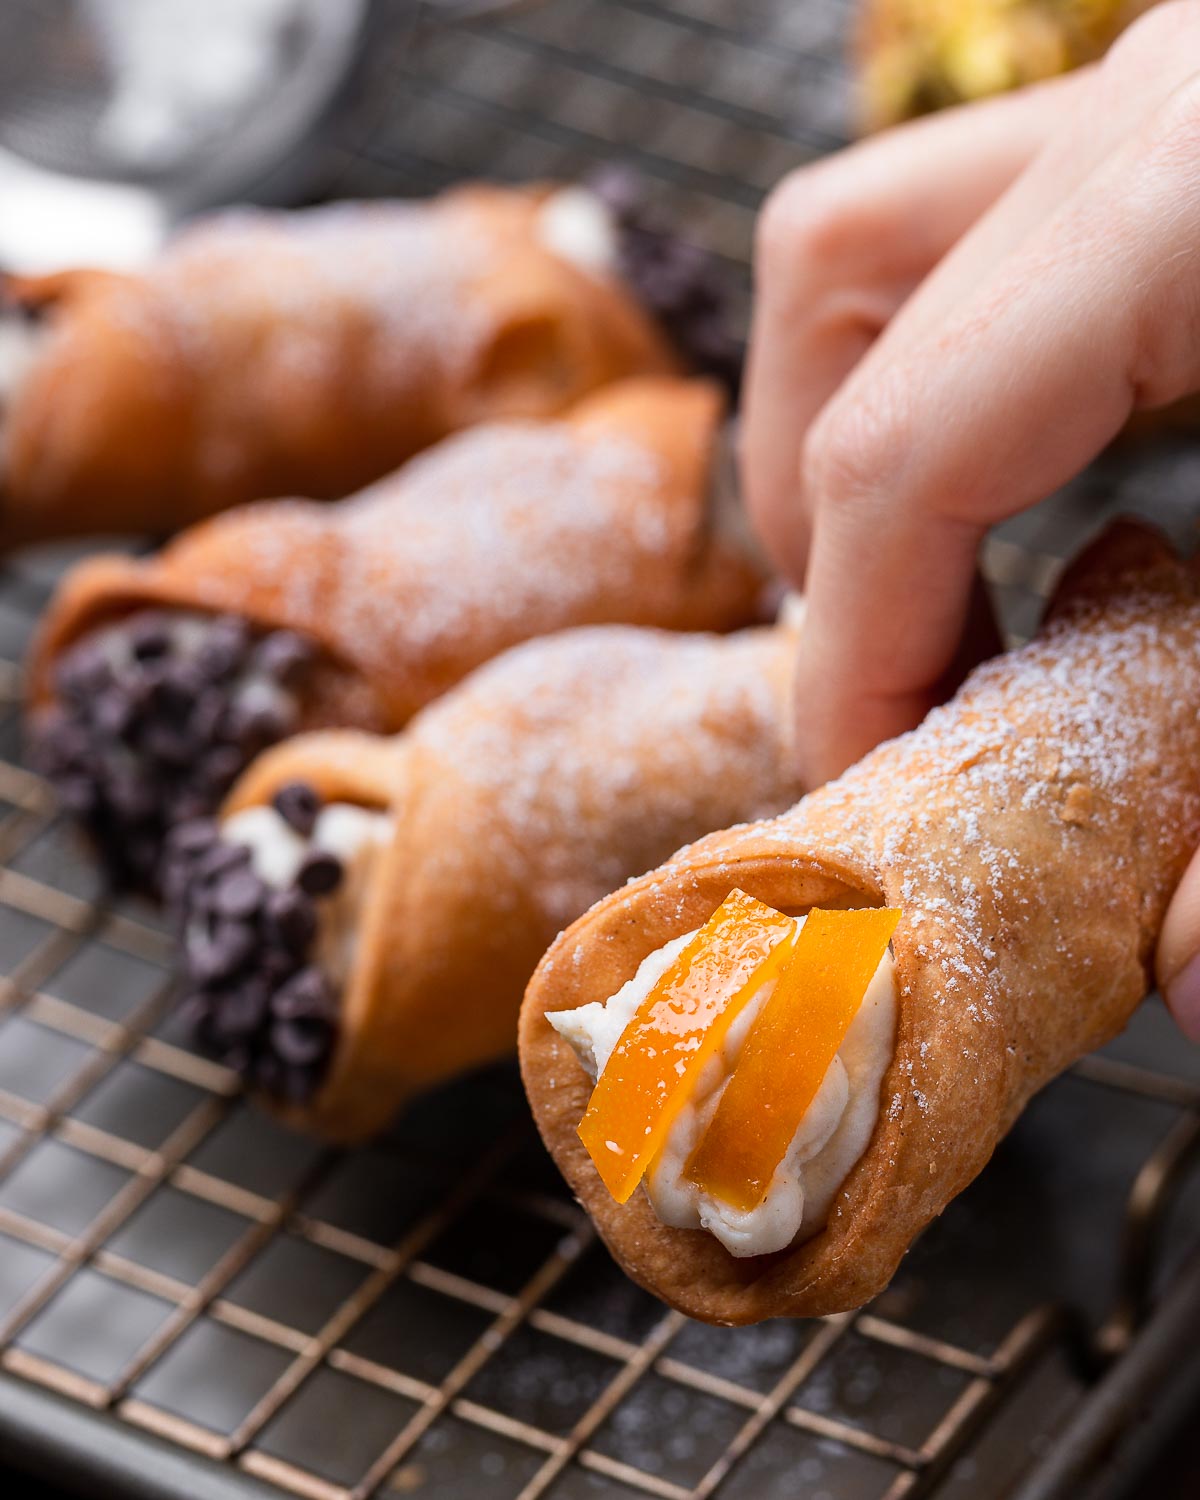 Hand holding a cannoli with candied orange peel.